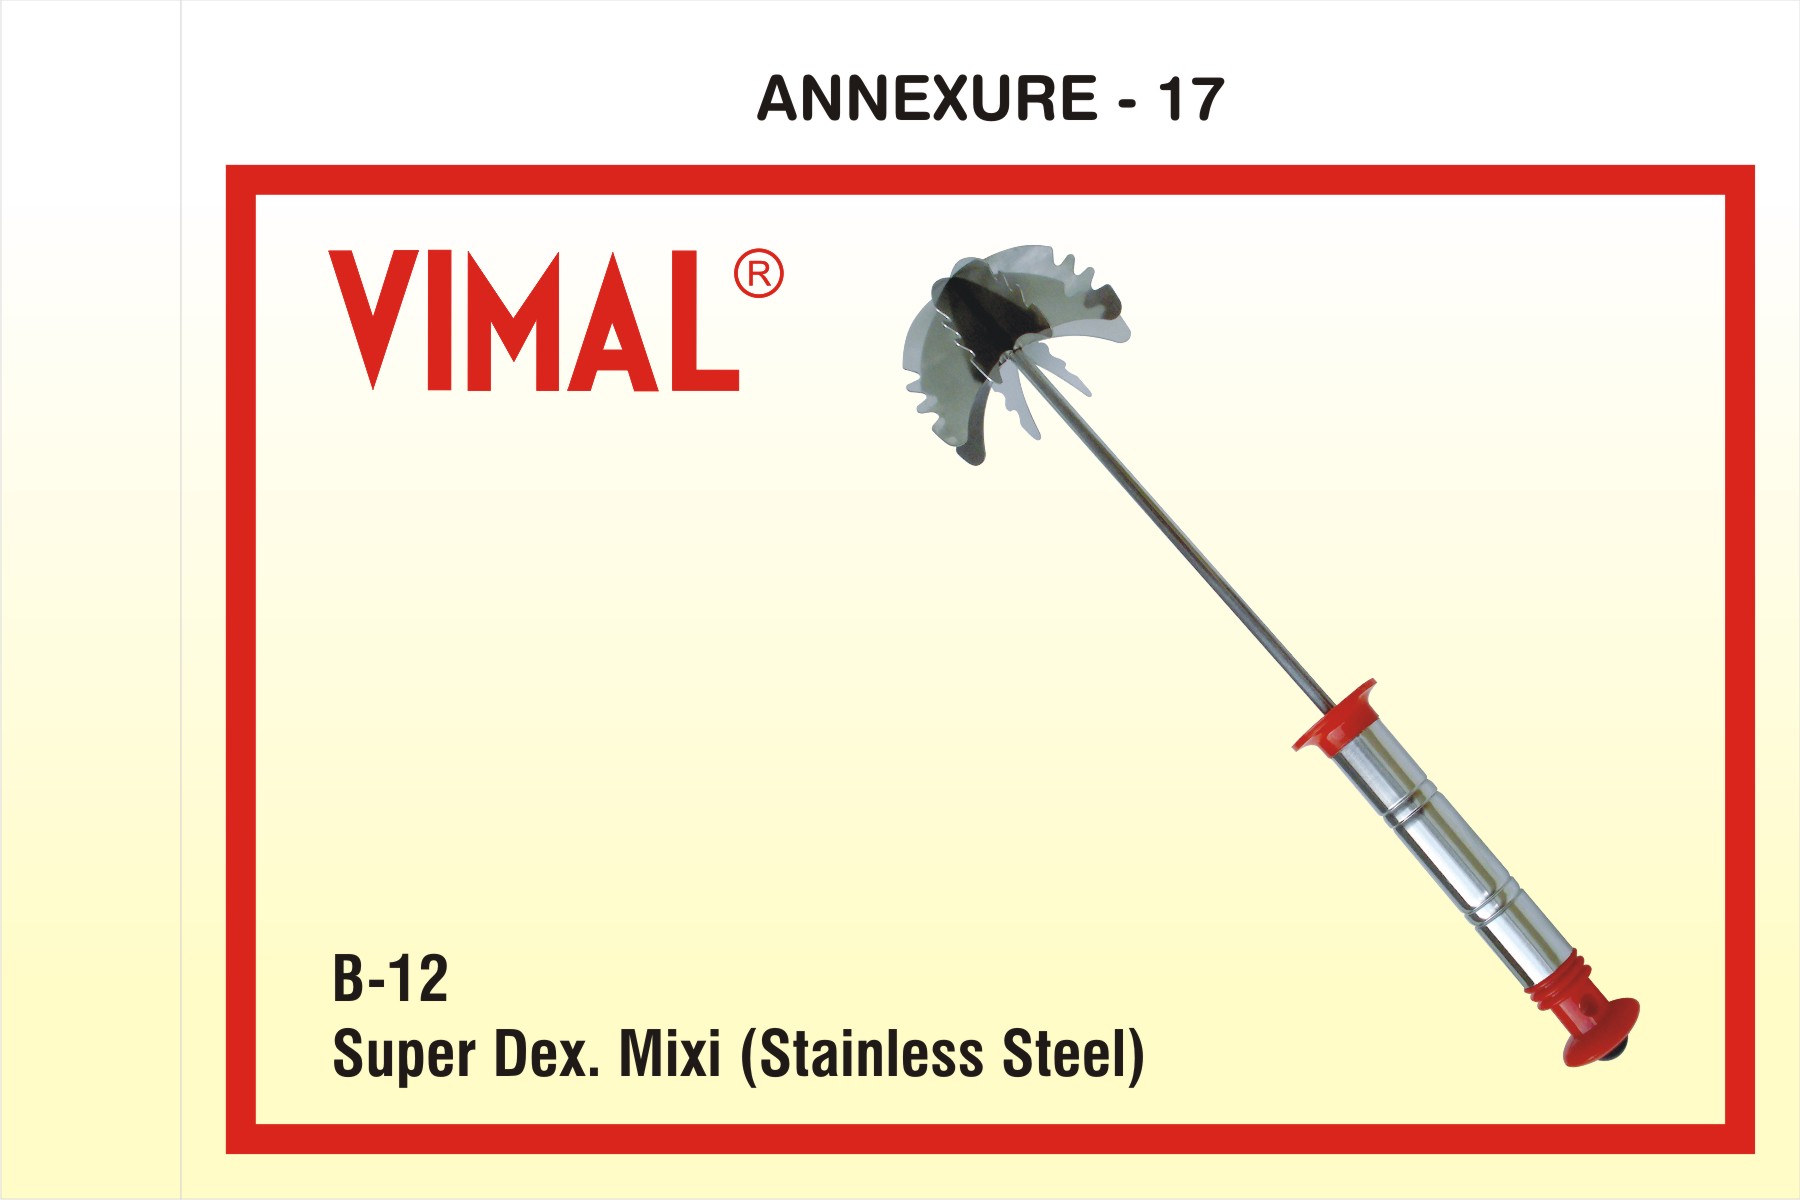 Mixi Super Deluxe (stainless Steel)